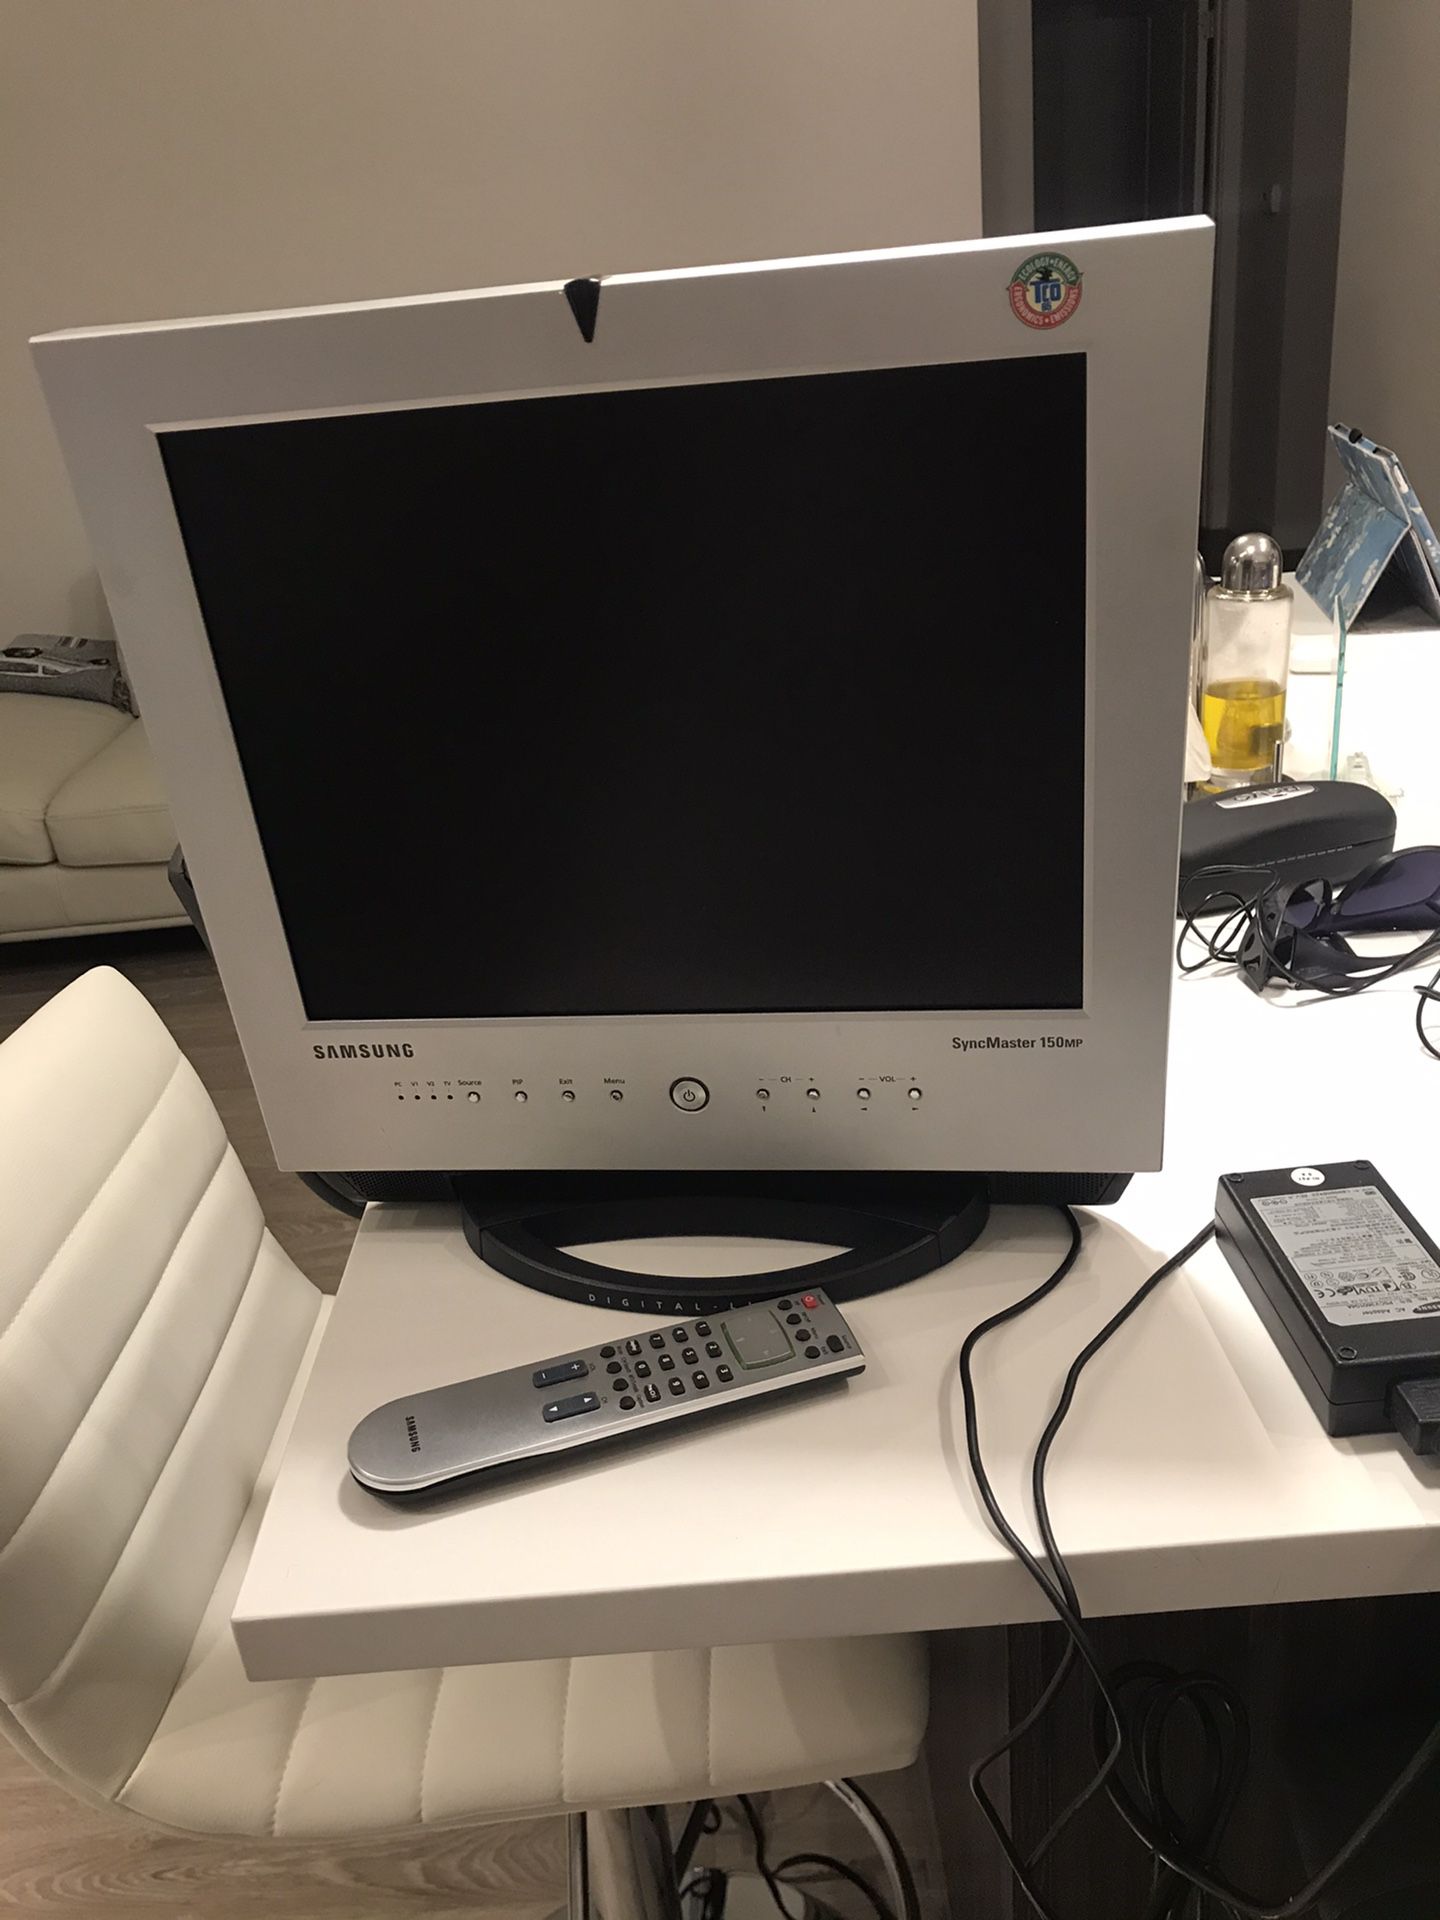 Excellent for Boat/Garage. SAMSUNG SYNC MASTER 150MP ( computer monitor/ tv )